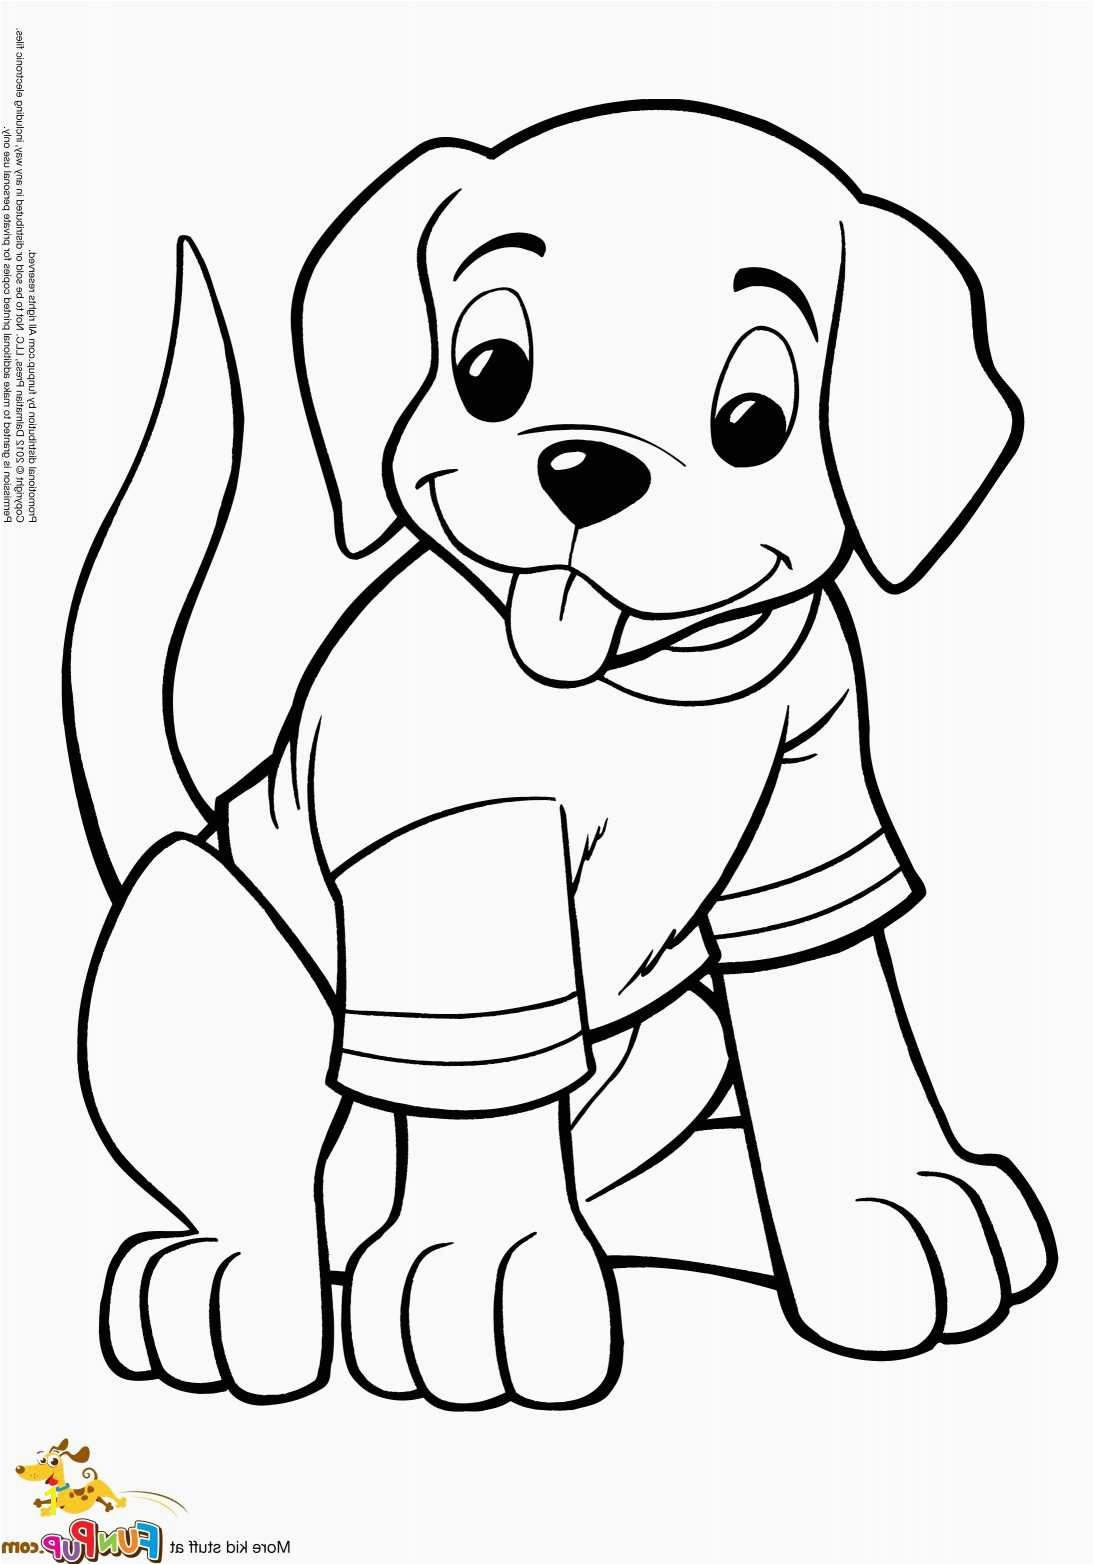 jellyfish coloring pages beautiful coloring pages animals lovely puppy coloring 0d labrador